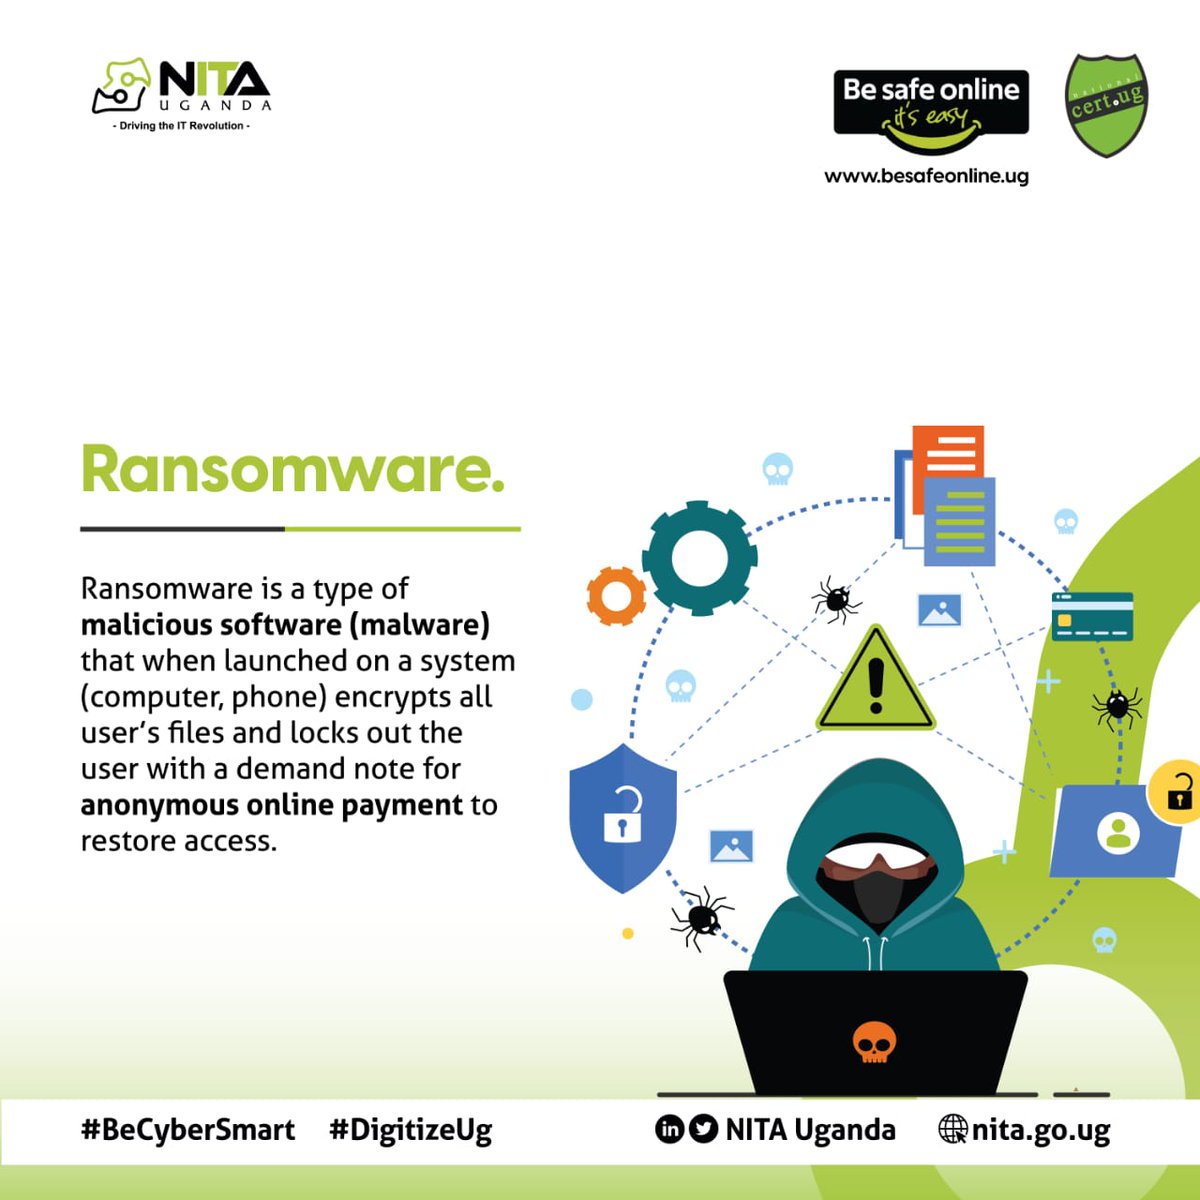 #CybersecurityAwarenessMonth Cyberattacks are on the rise, and ransomware is a serious threat. Don't be a victim! Protect your data, use strong passwords, and keep your systems updated. Stay informed, stay secure! #BeCyberSmart